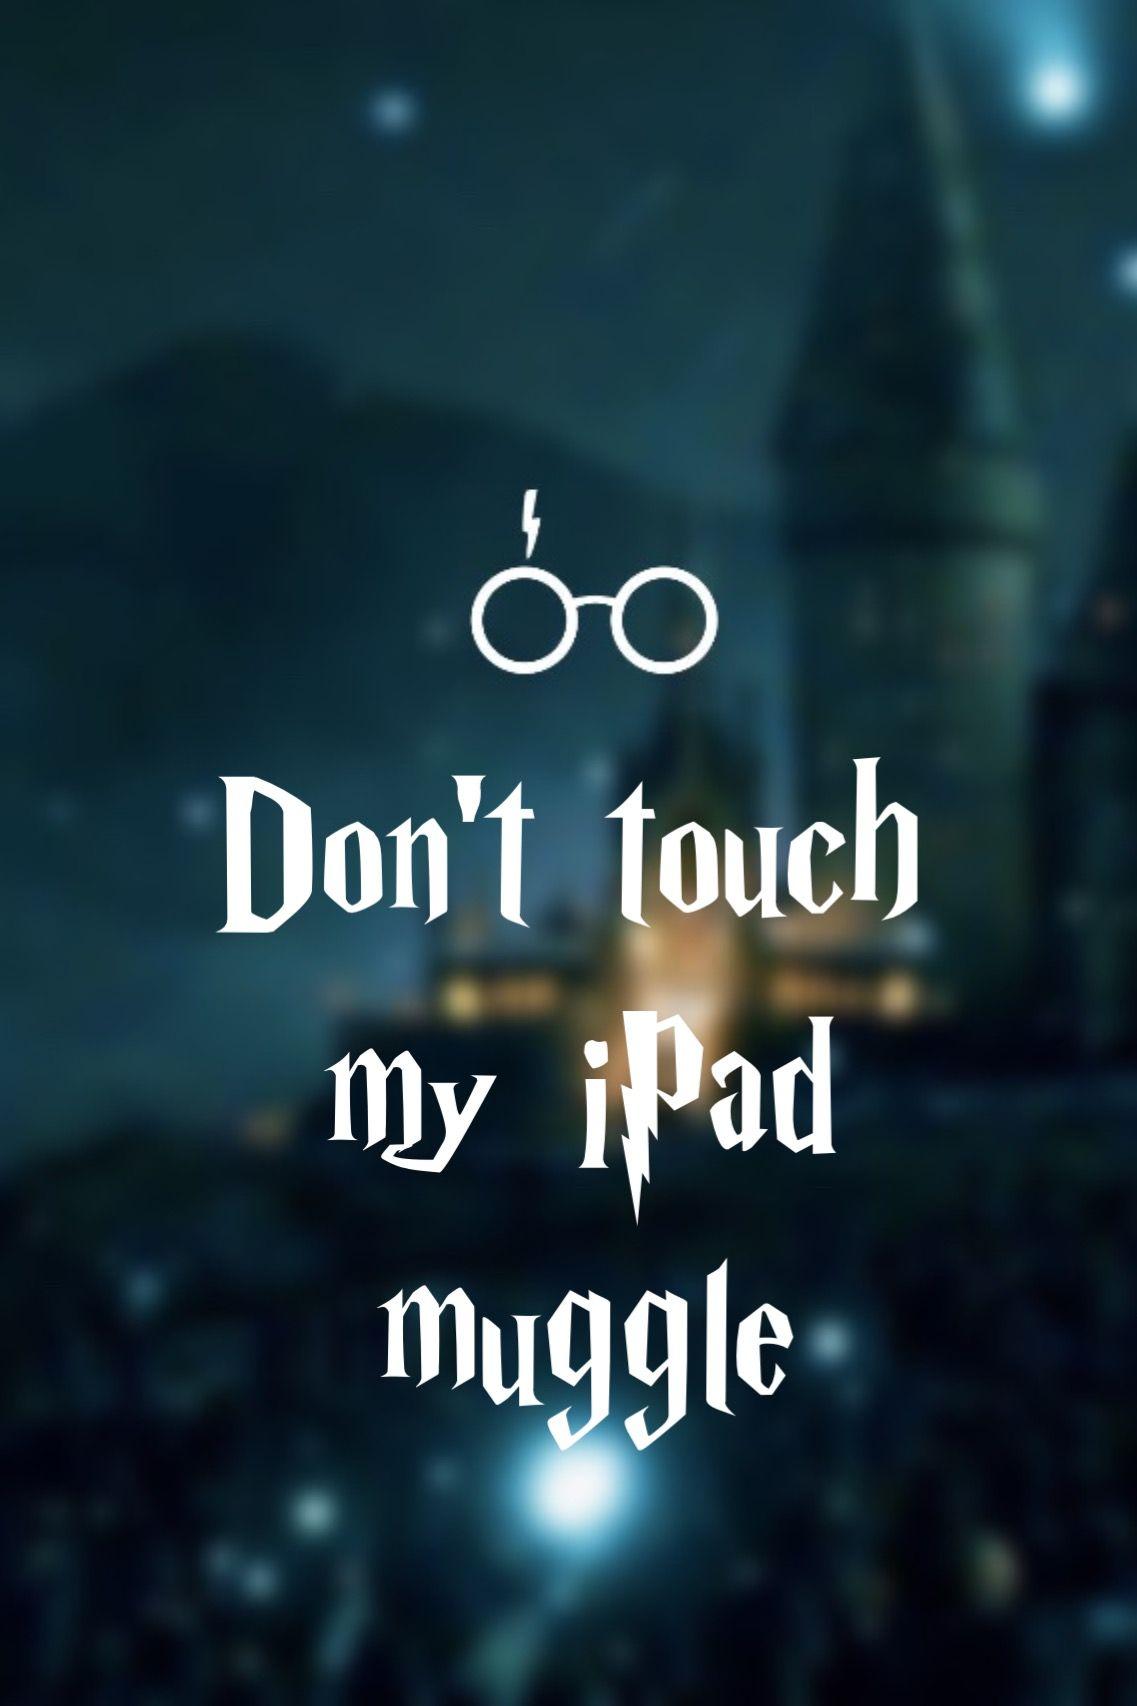 Don't touch my iPad muggle WALLPAPER #HarryPotter. Cool